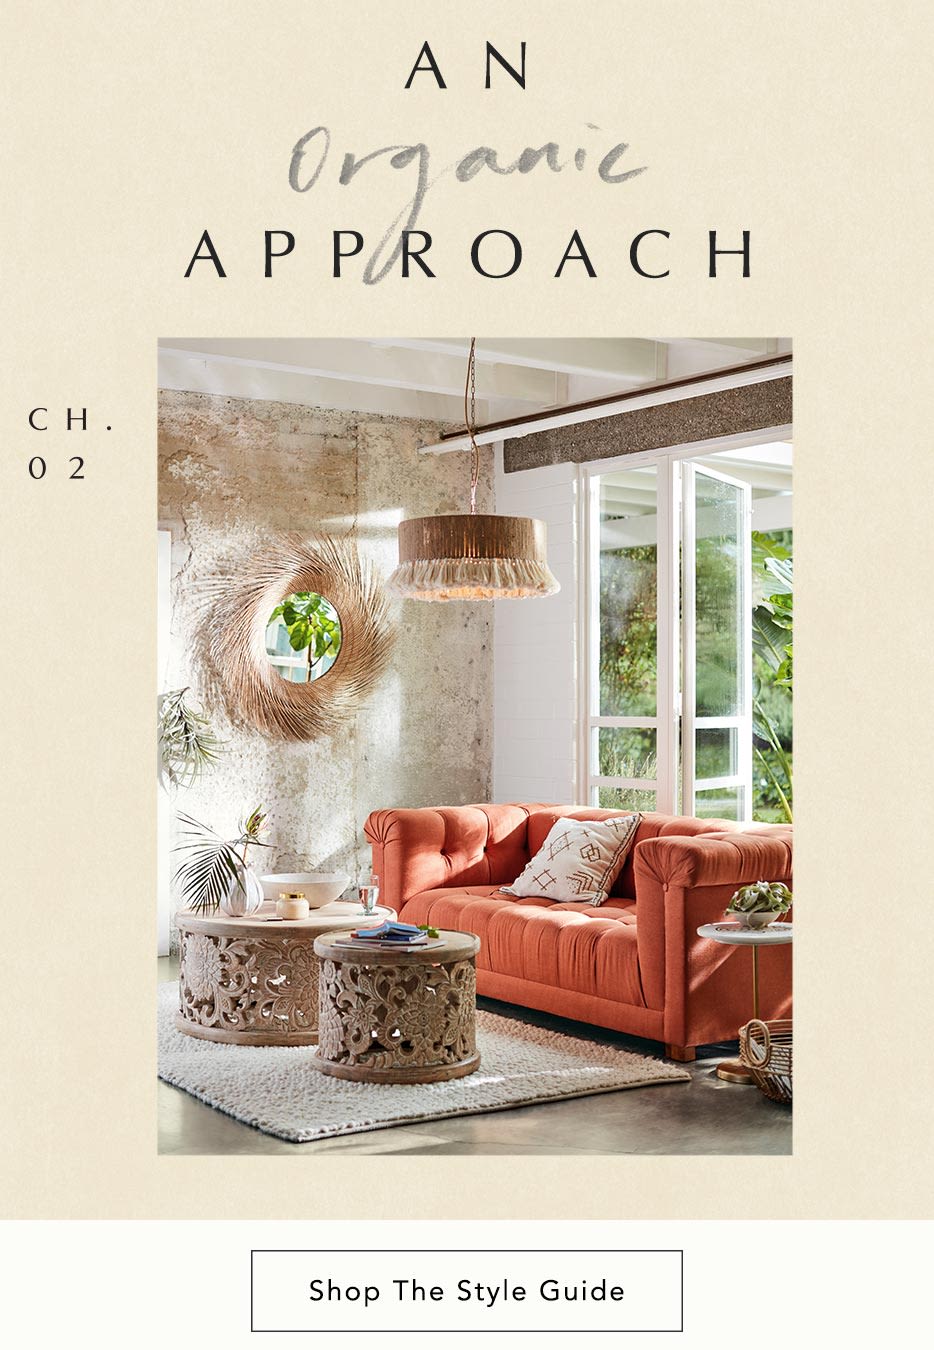 15 Best Home Decor Catalogs you Can Get for Free - Chasing A Better Life | Lifestyle & Keto | Travel | Keto Recipes